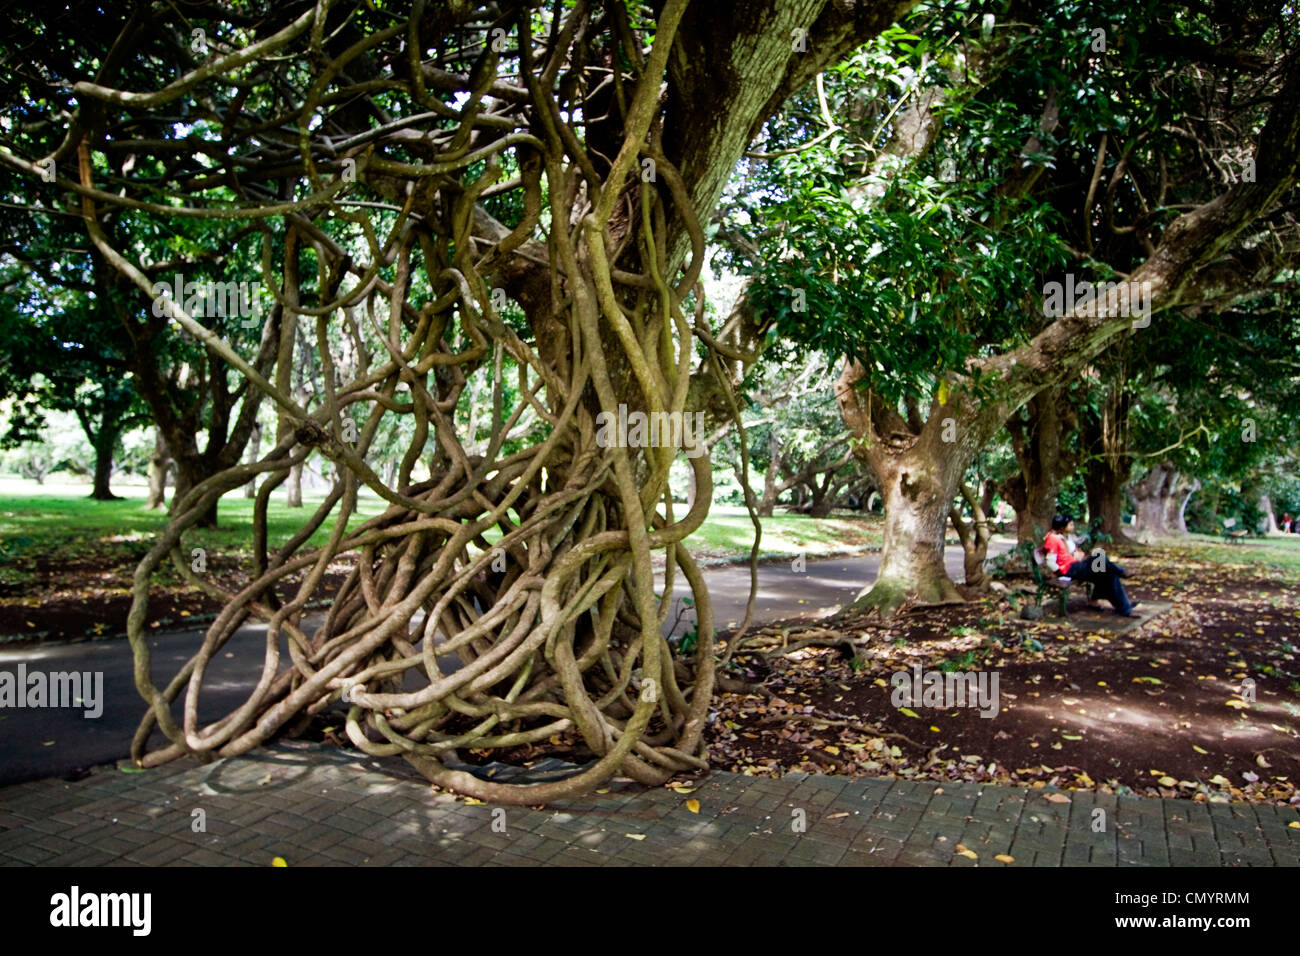 Sir Seewoosagur Ramgoolam Royal Botanical Garden of Pamplemousses, Giant Tree with arial roots, Mauritius, Africa Stock Photo